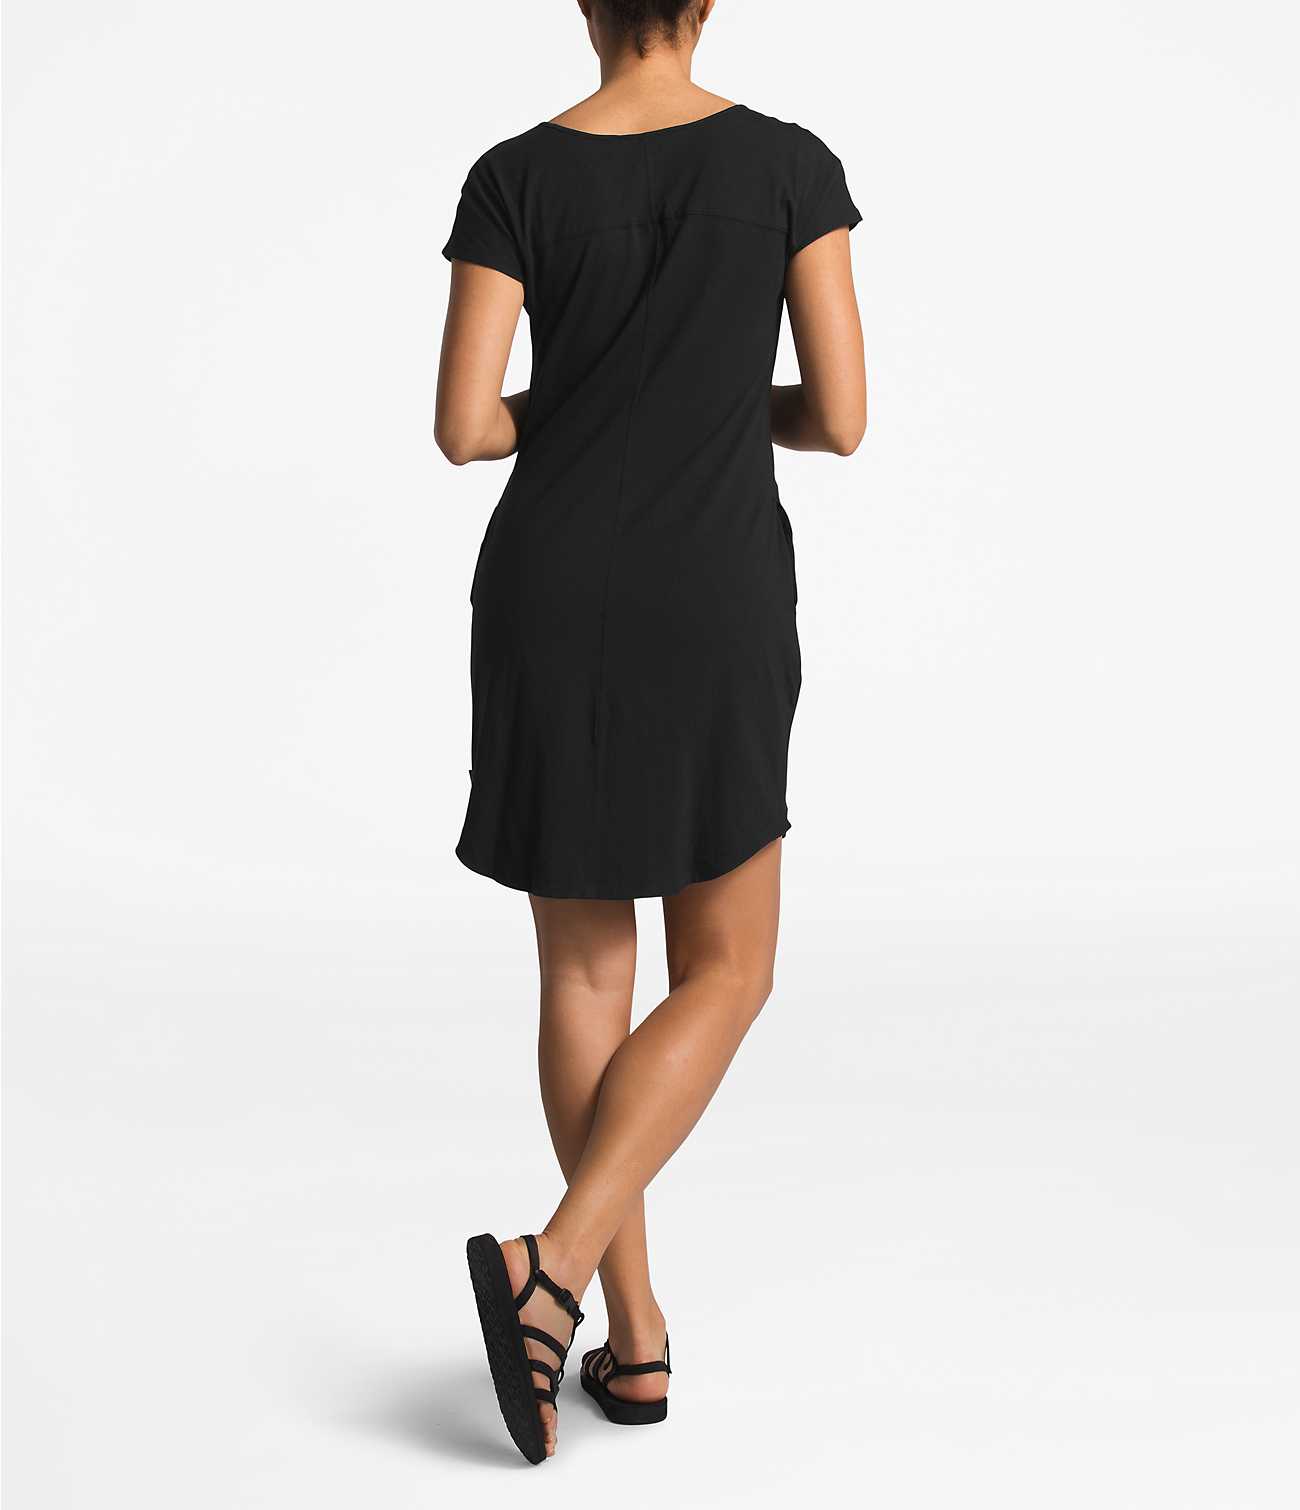 The North Face Women's Loasis Tee Dress